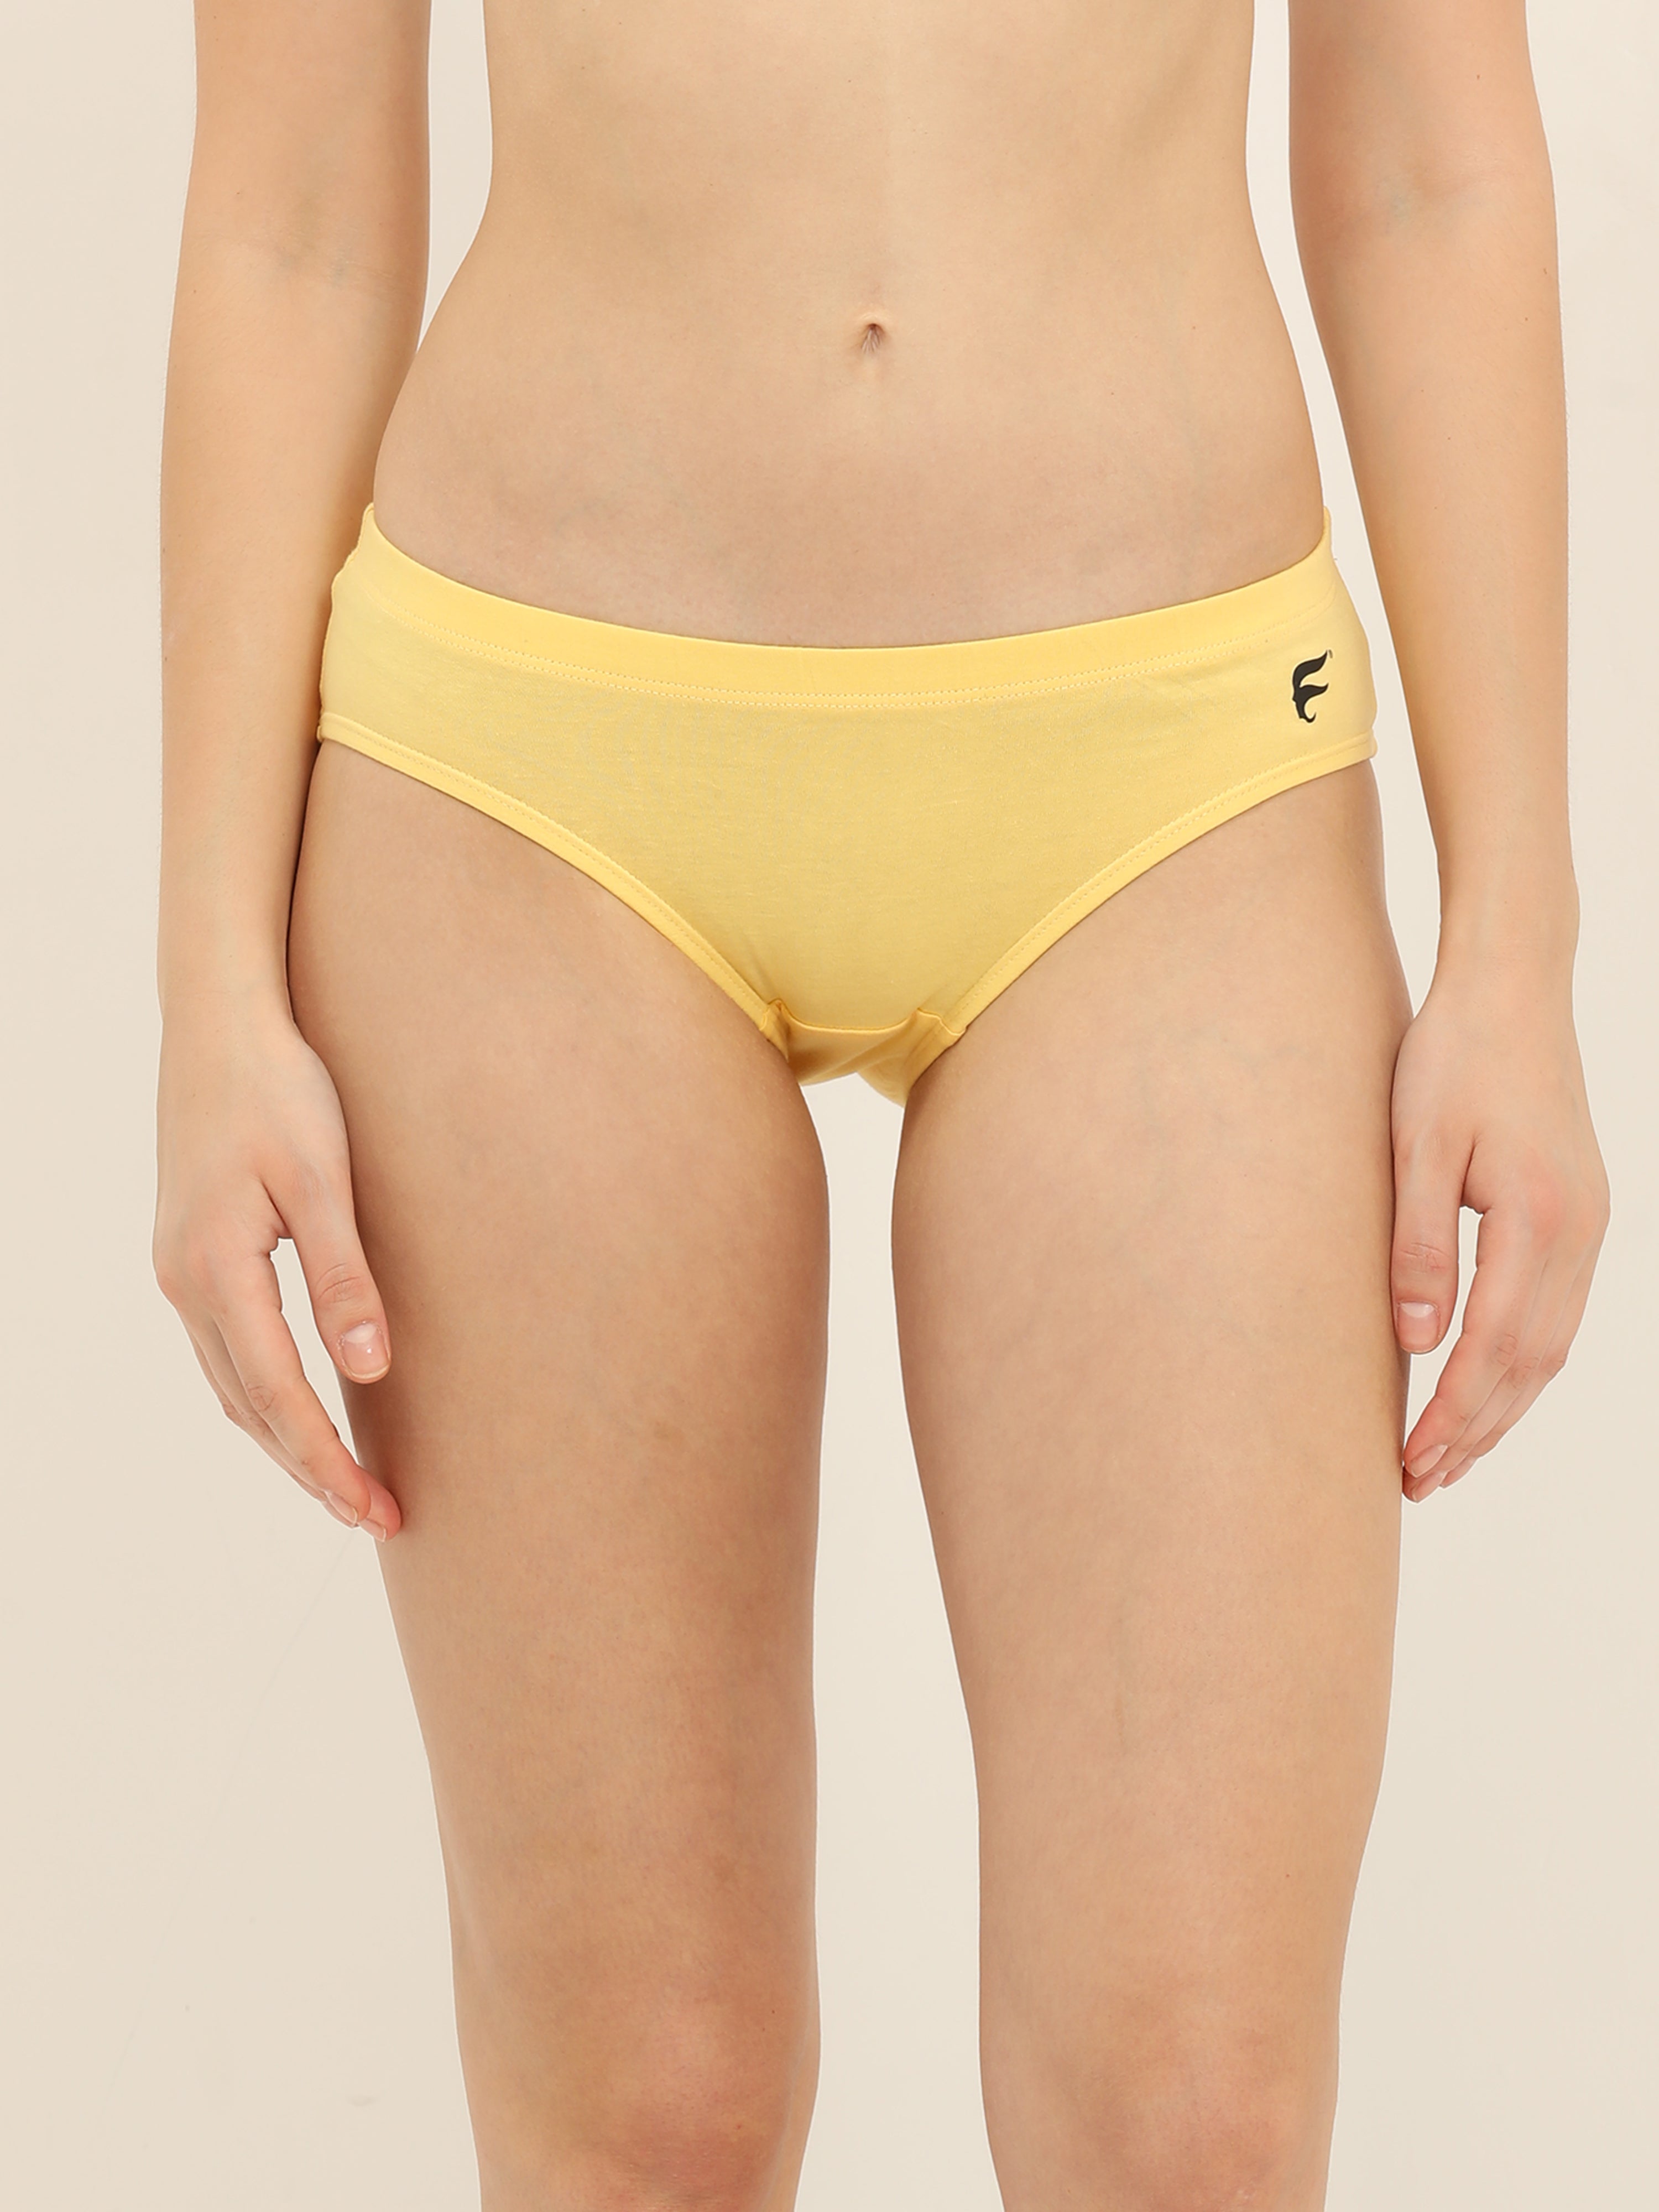 Envie Brief, Low rise panty (Pack of 3) Combo  yellow, Navy, Plum